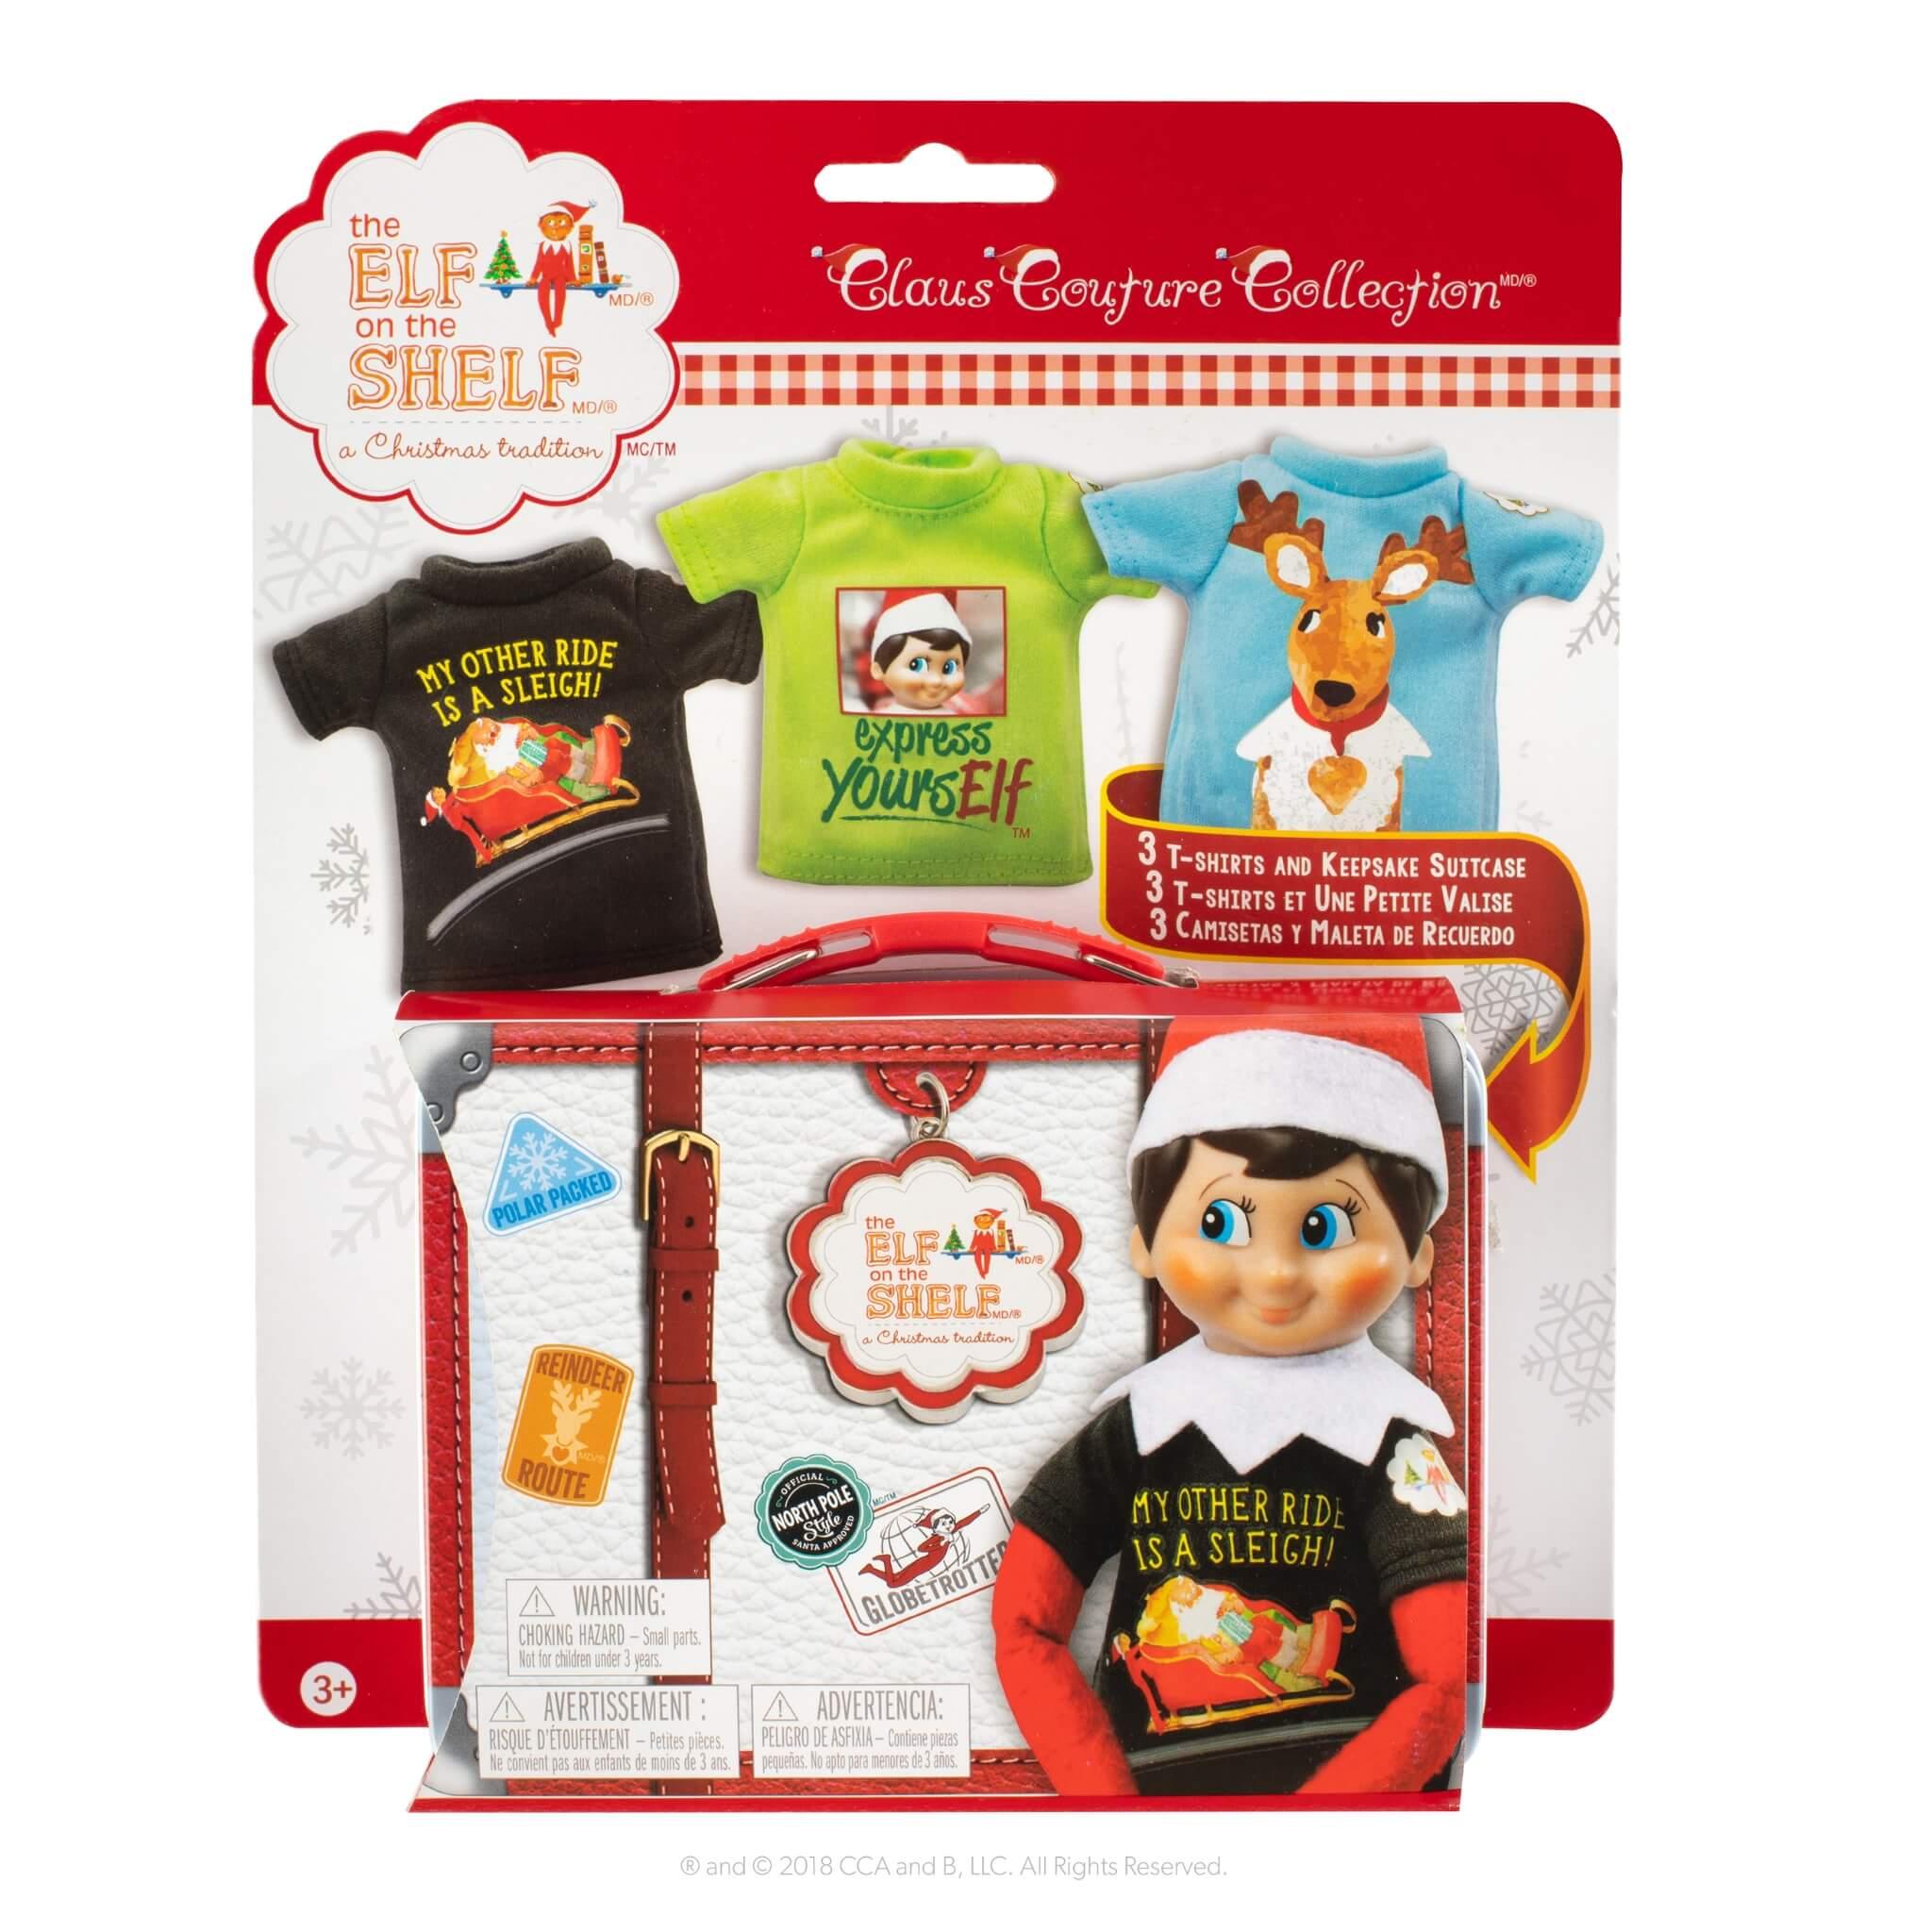 Claus Couture Collection® Tee Multipack: Express YoursELF (Scout Elf Clothes) - The Elf on The Shelf